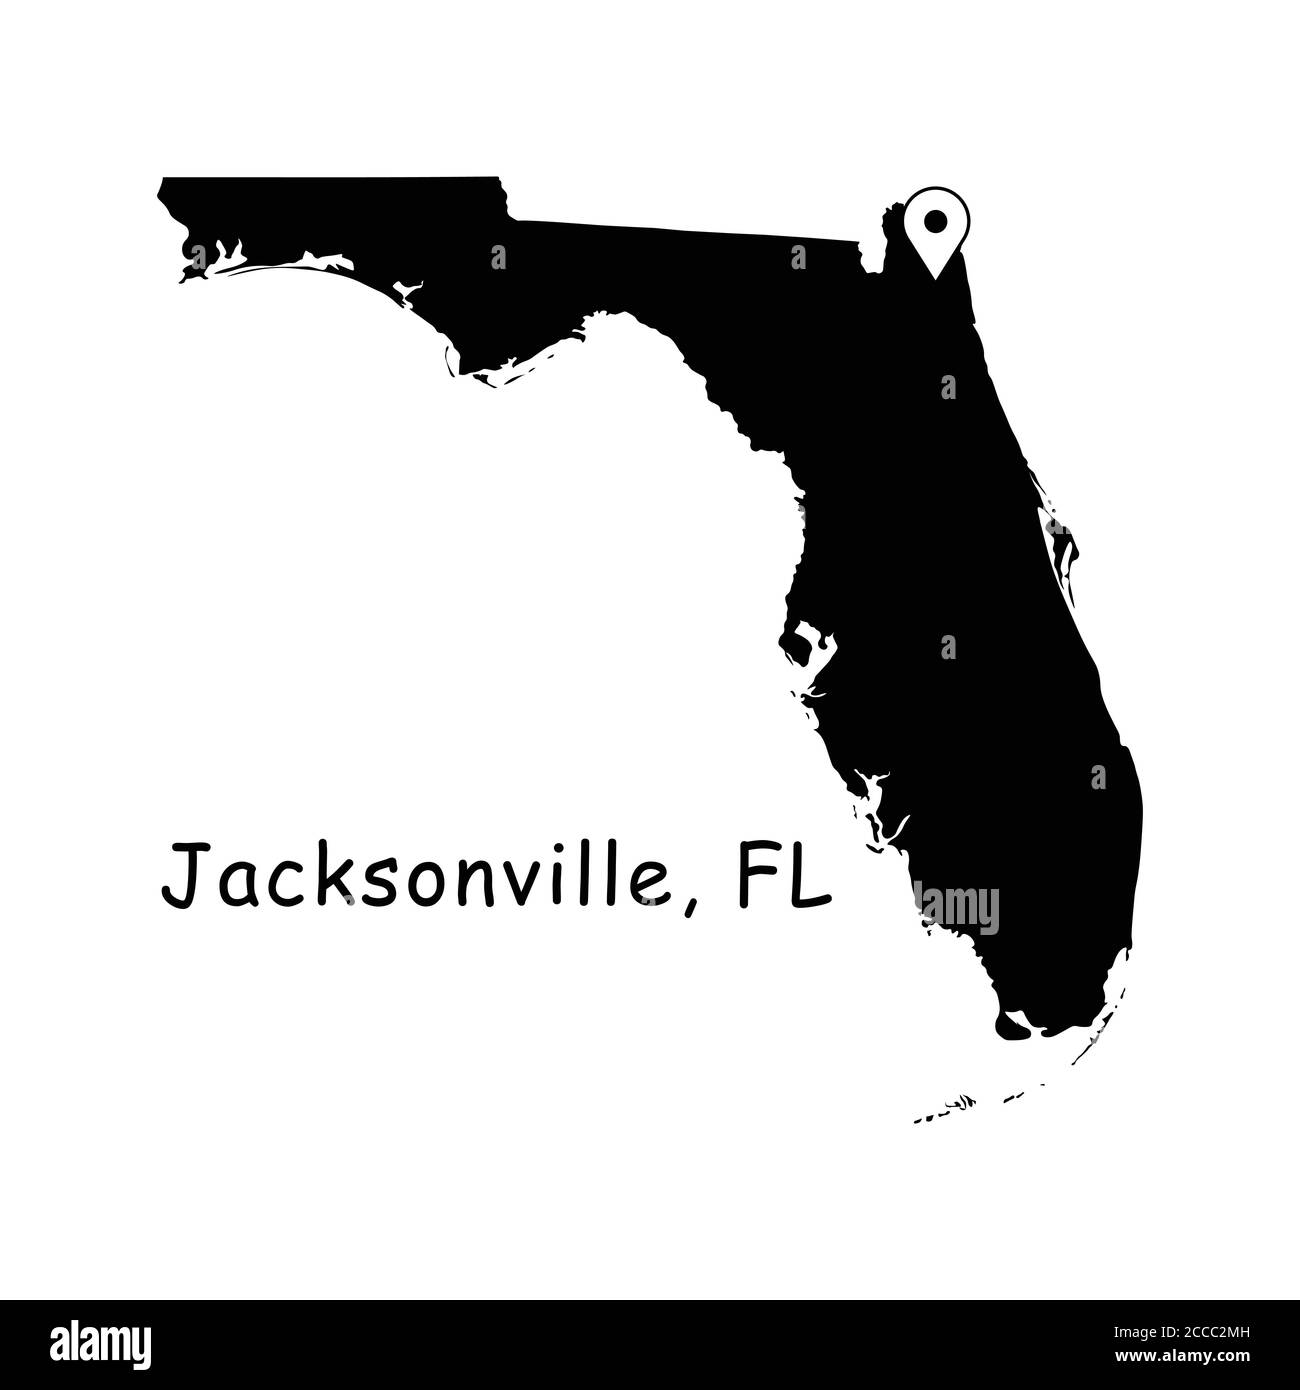 Jacksonville on Florida State Map. Detailed FL State Map with Location Pin on Jacksonville City. Black silhouette vector map isolated on white backgro Stock Vector